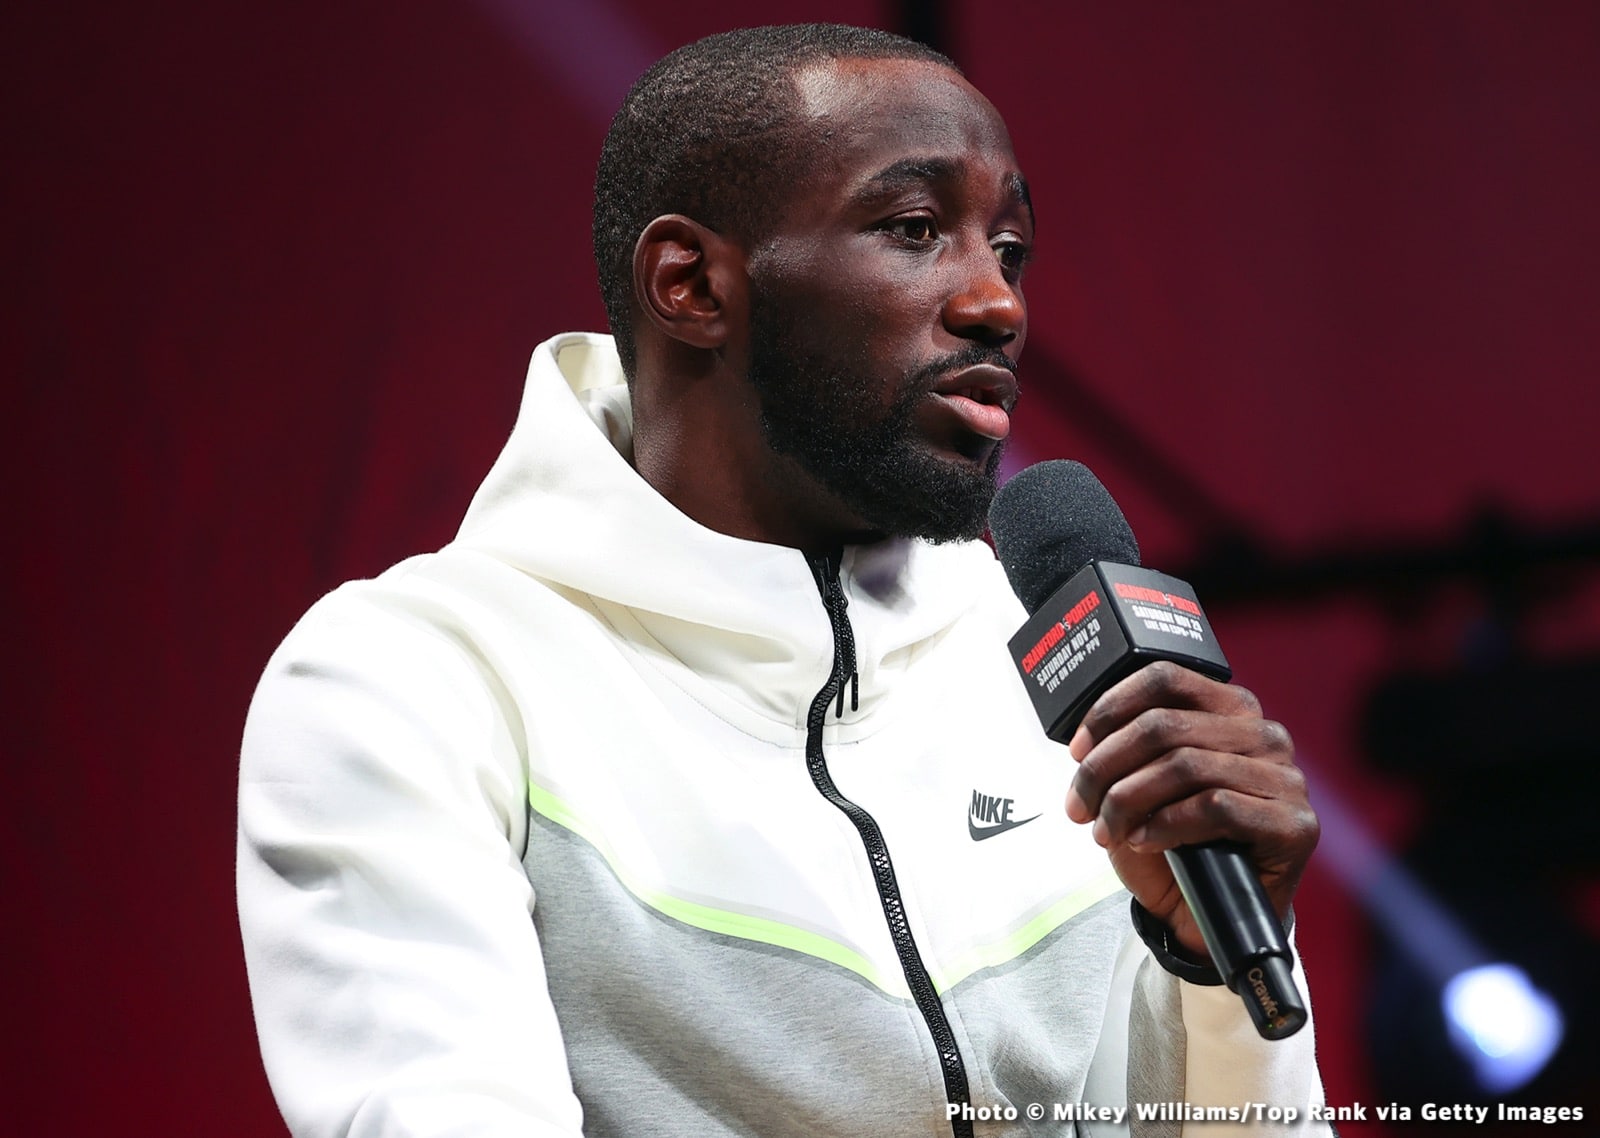 Terence Crawford compliments UK fans, say they're the BEST